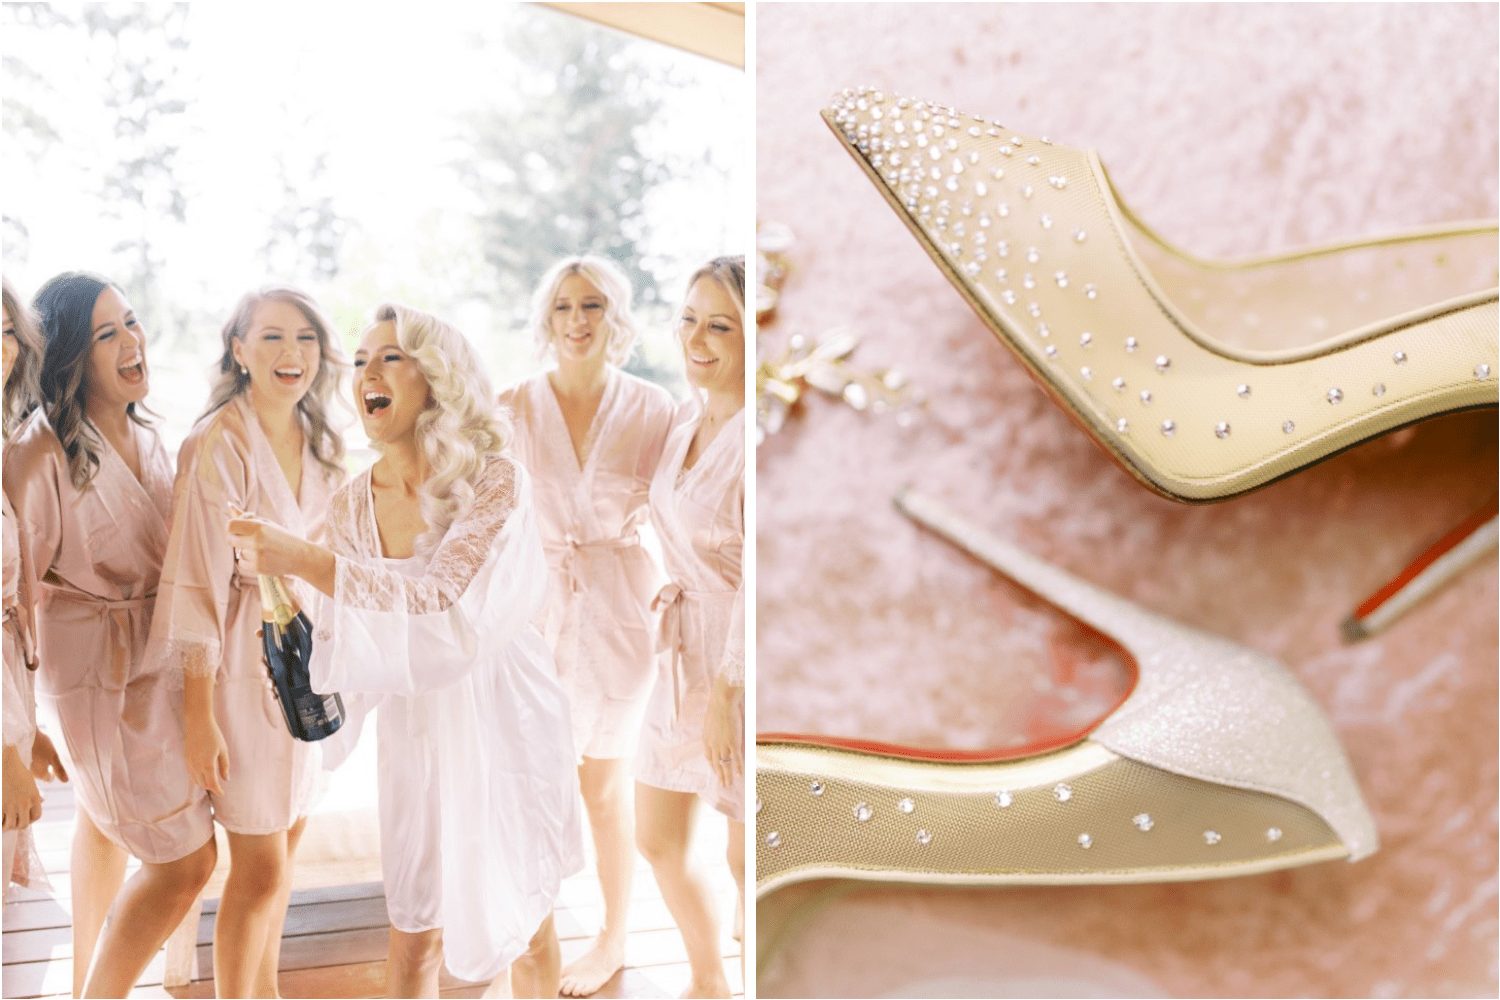 The bridesmaids and bombshell bride Karlie + Louboutin heels